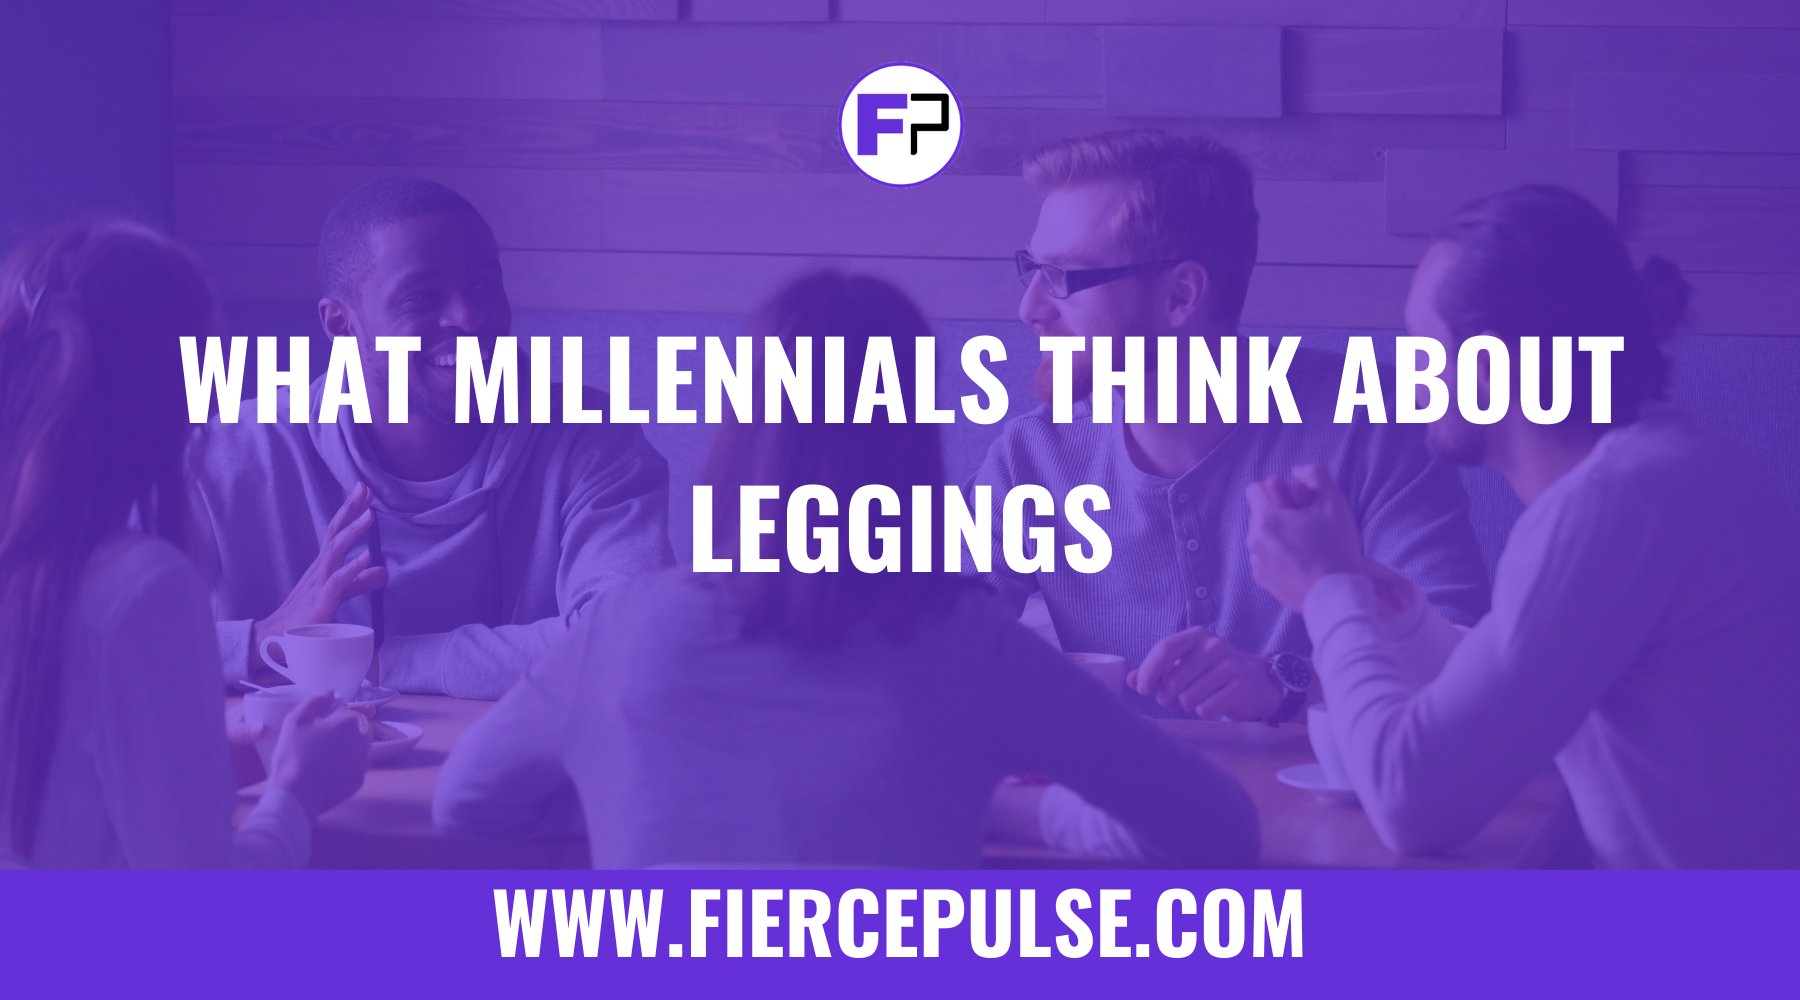 What Millennials Think About Leggings